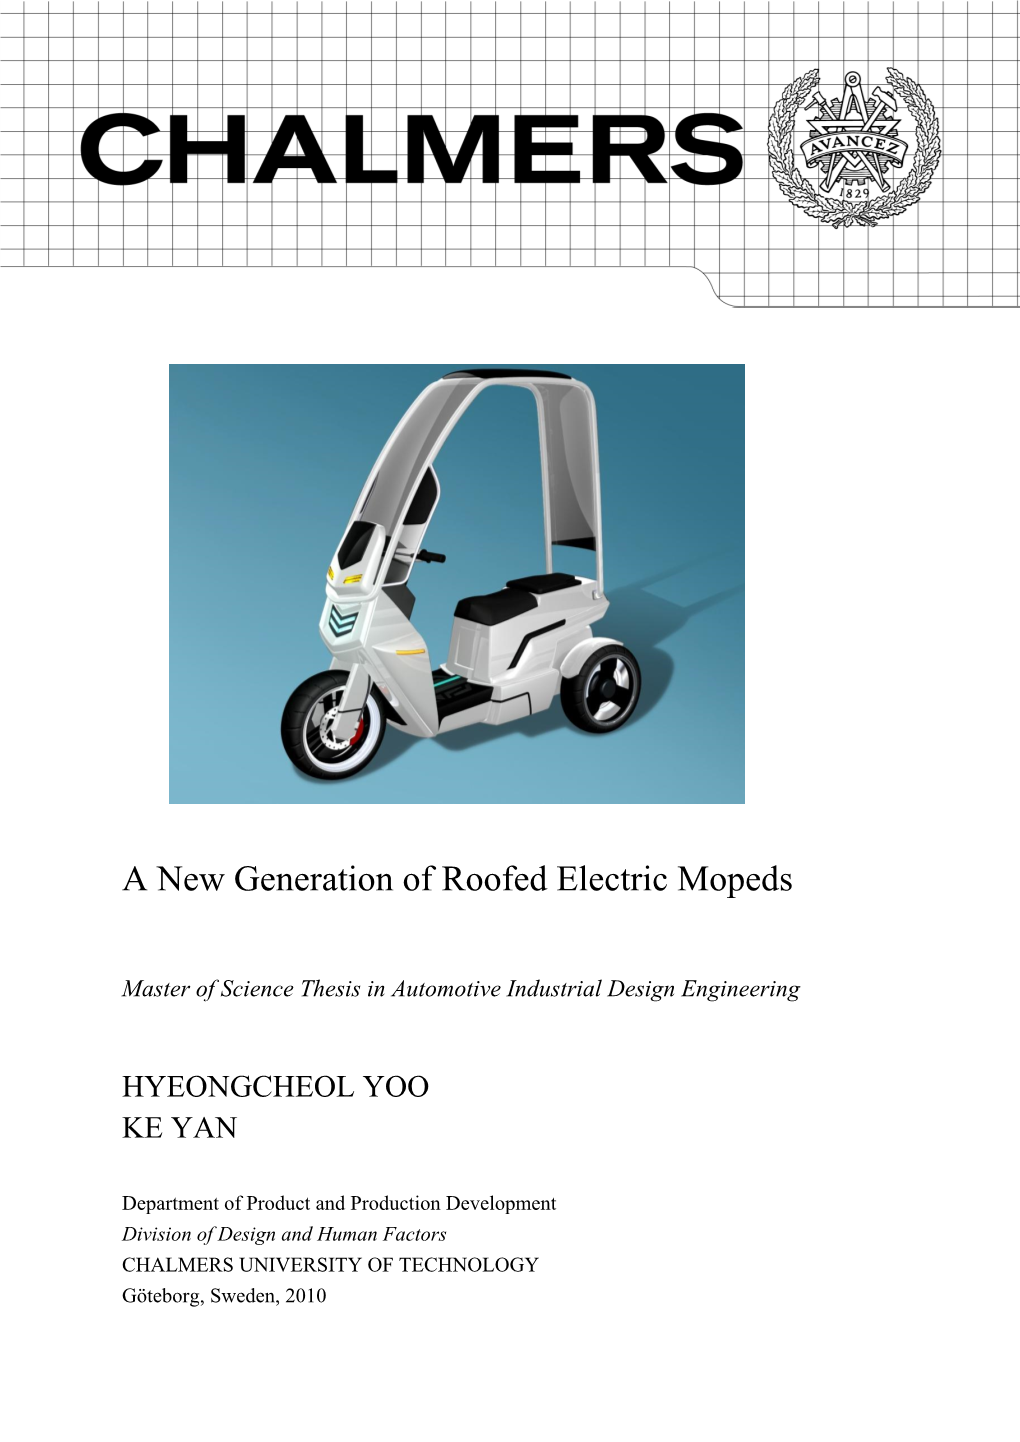 A New Generation of Roofed Electric Mopeds